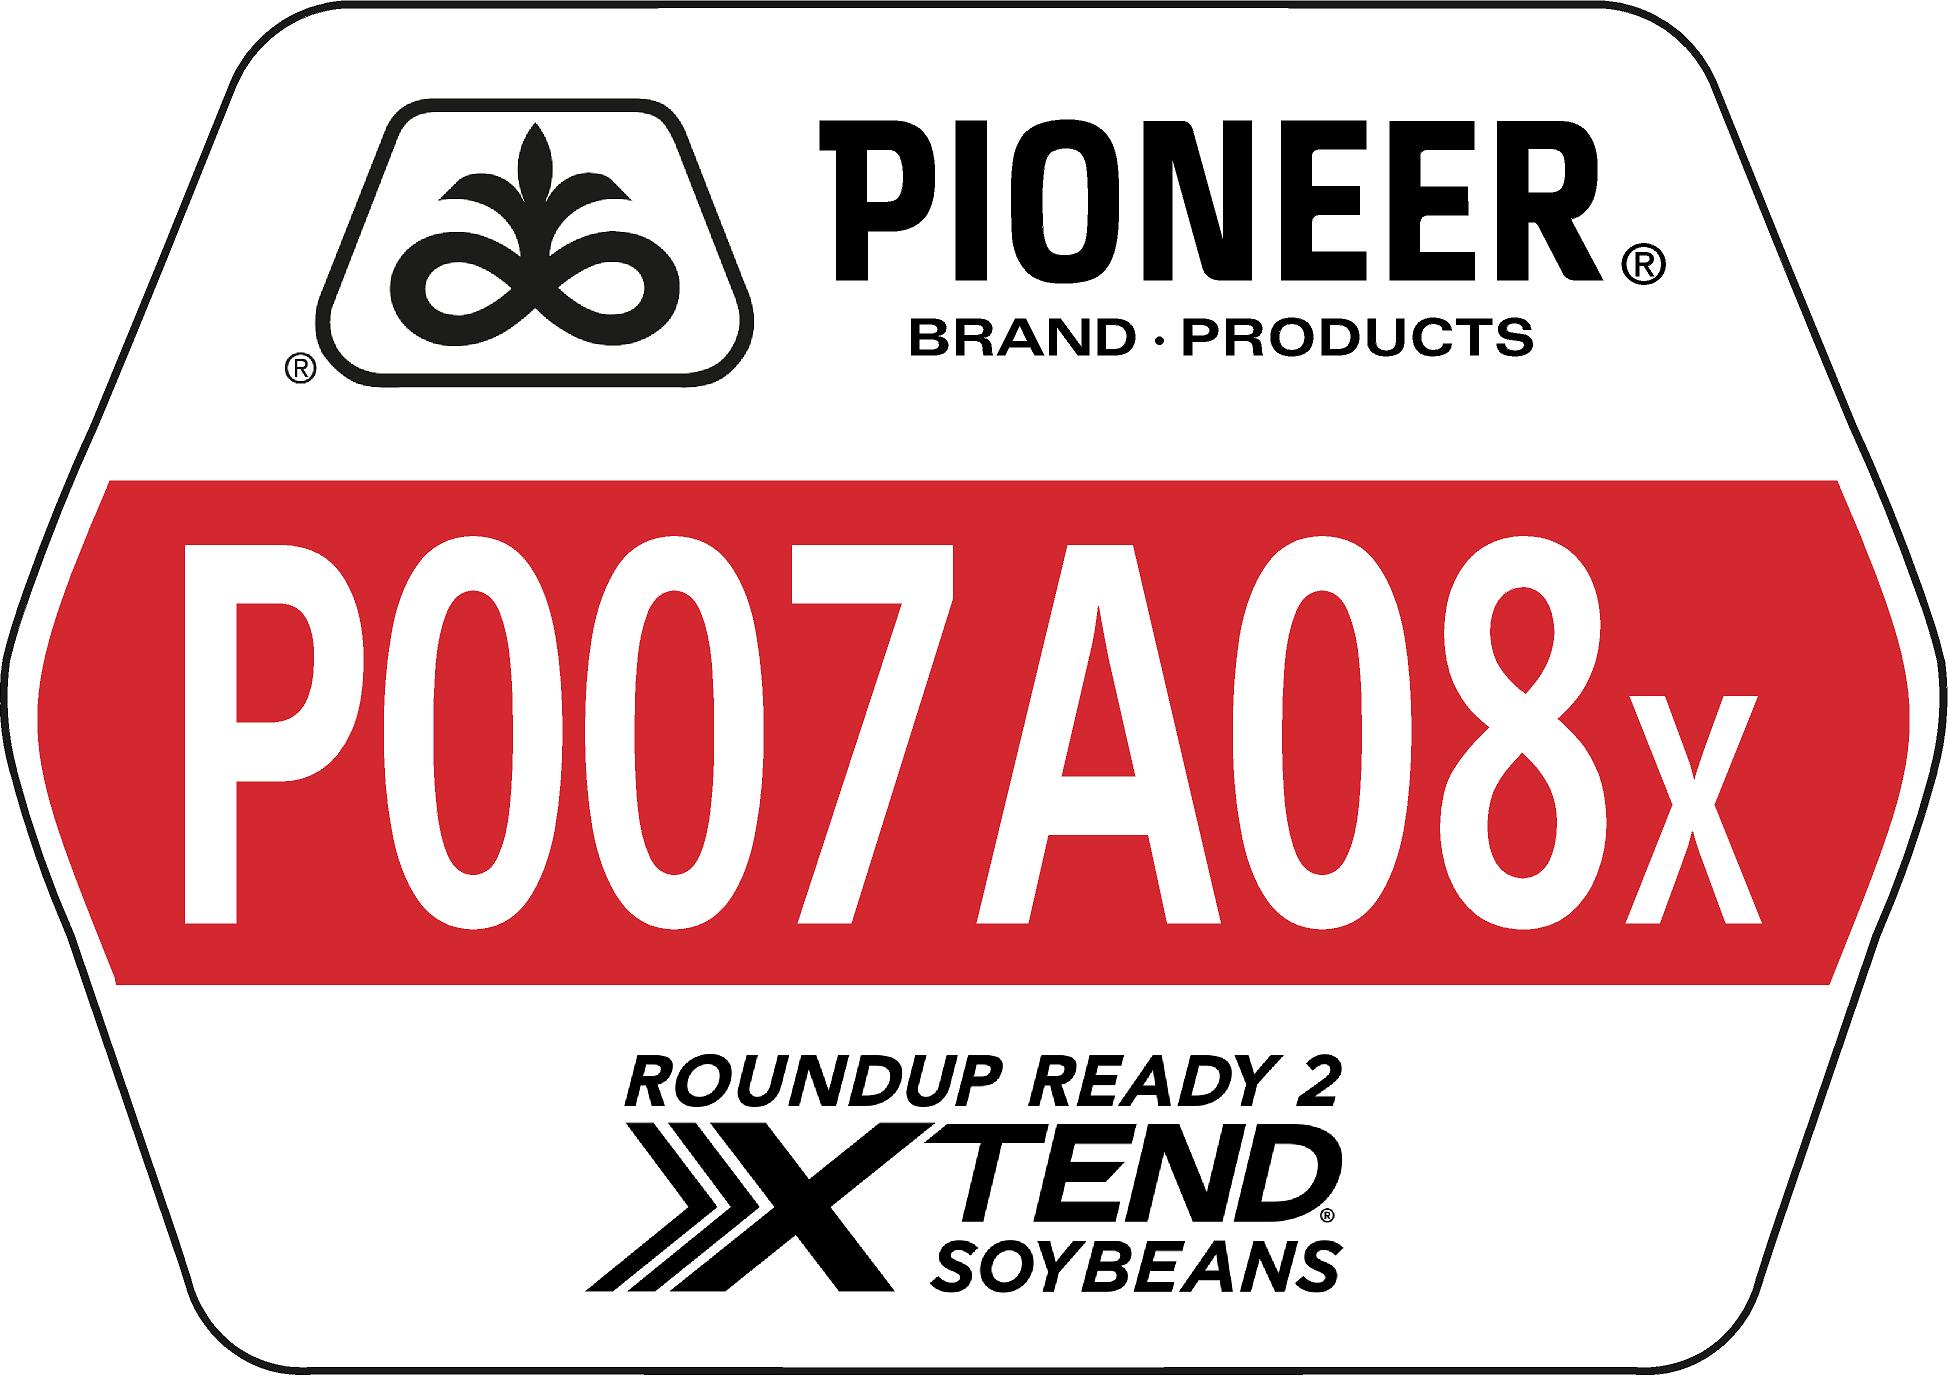 Field Signs - Soybeans - P007A08X